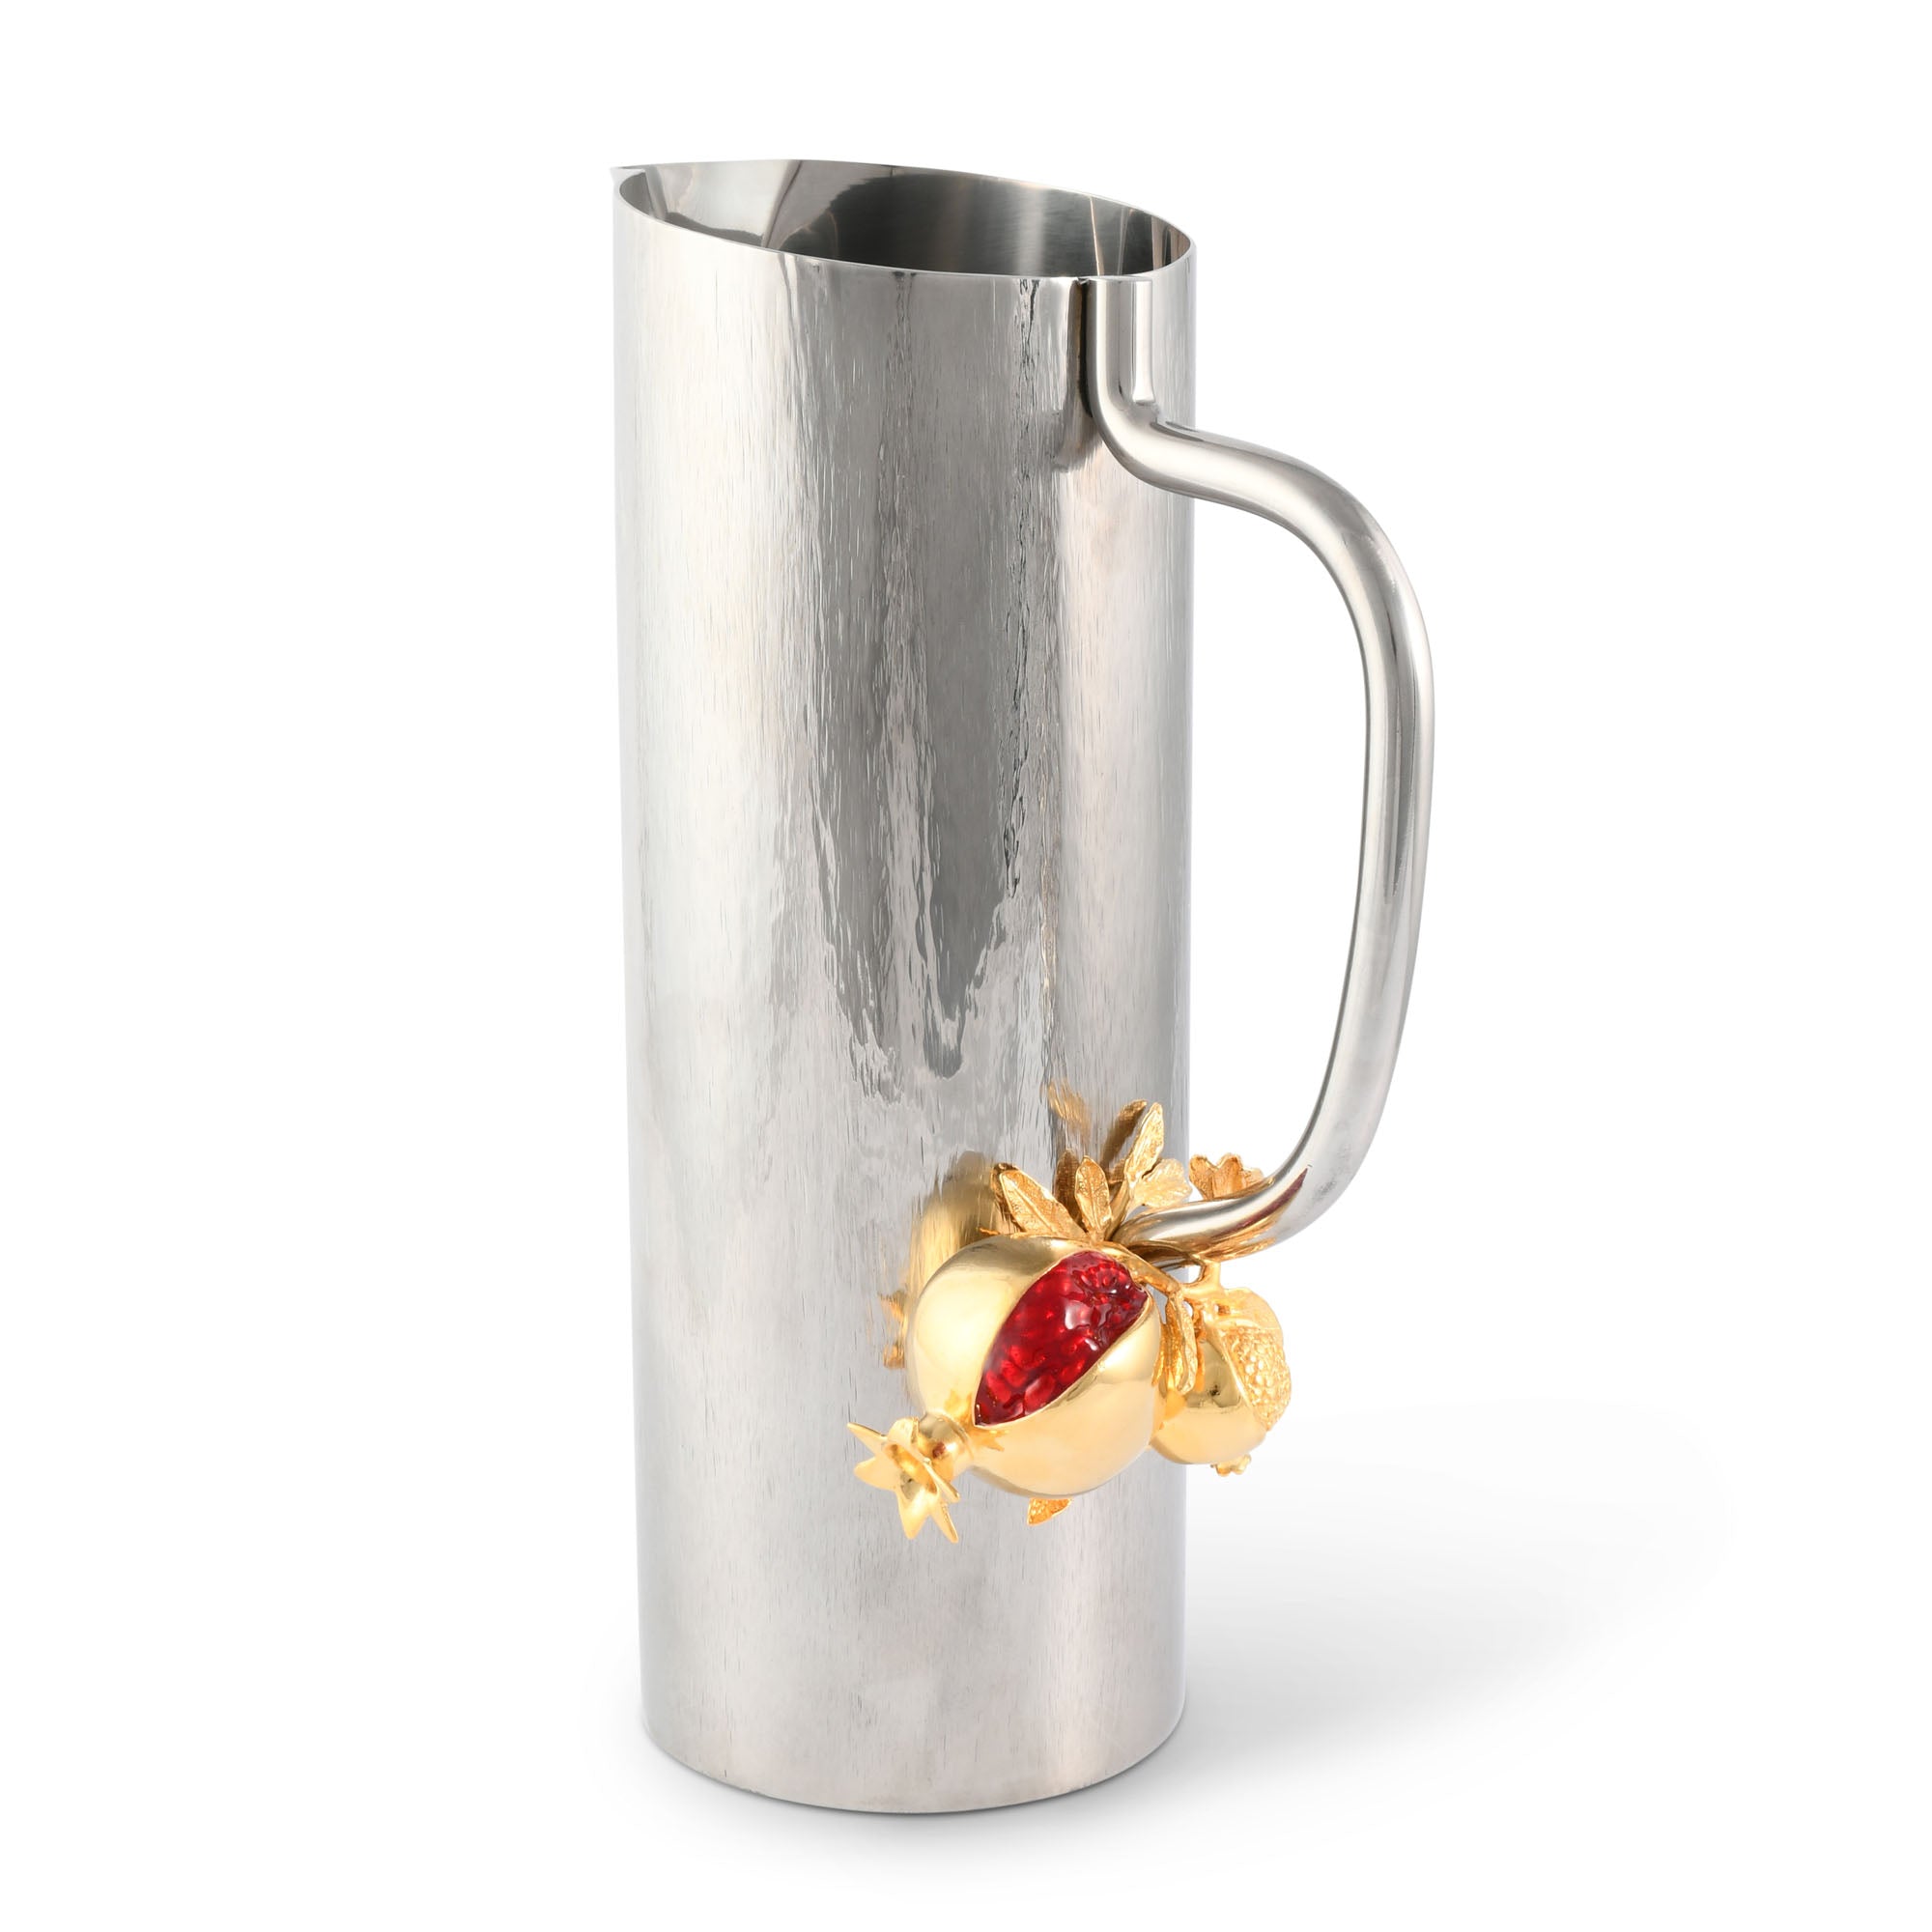 Vagabond House Gold Pomegranate Stainless Steel Pitcher Product Image